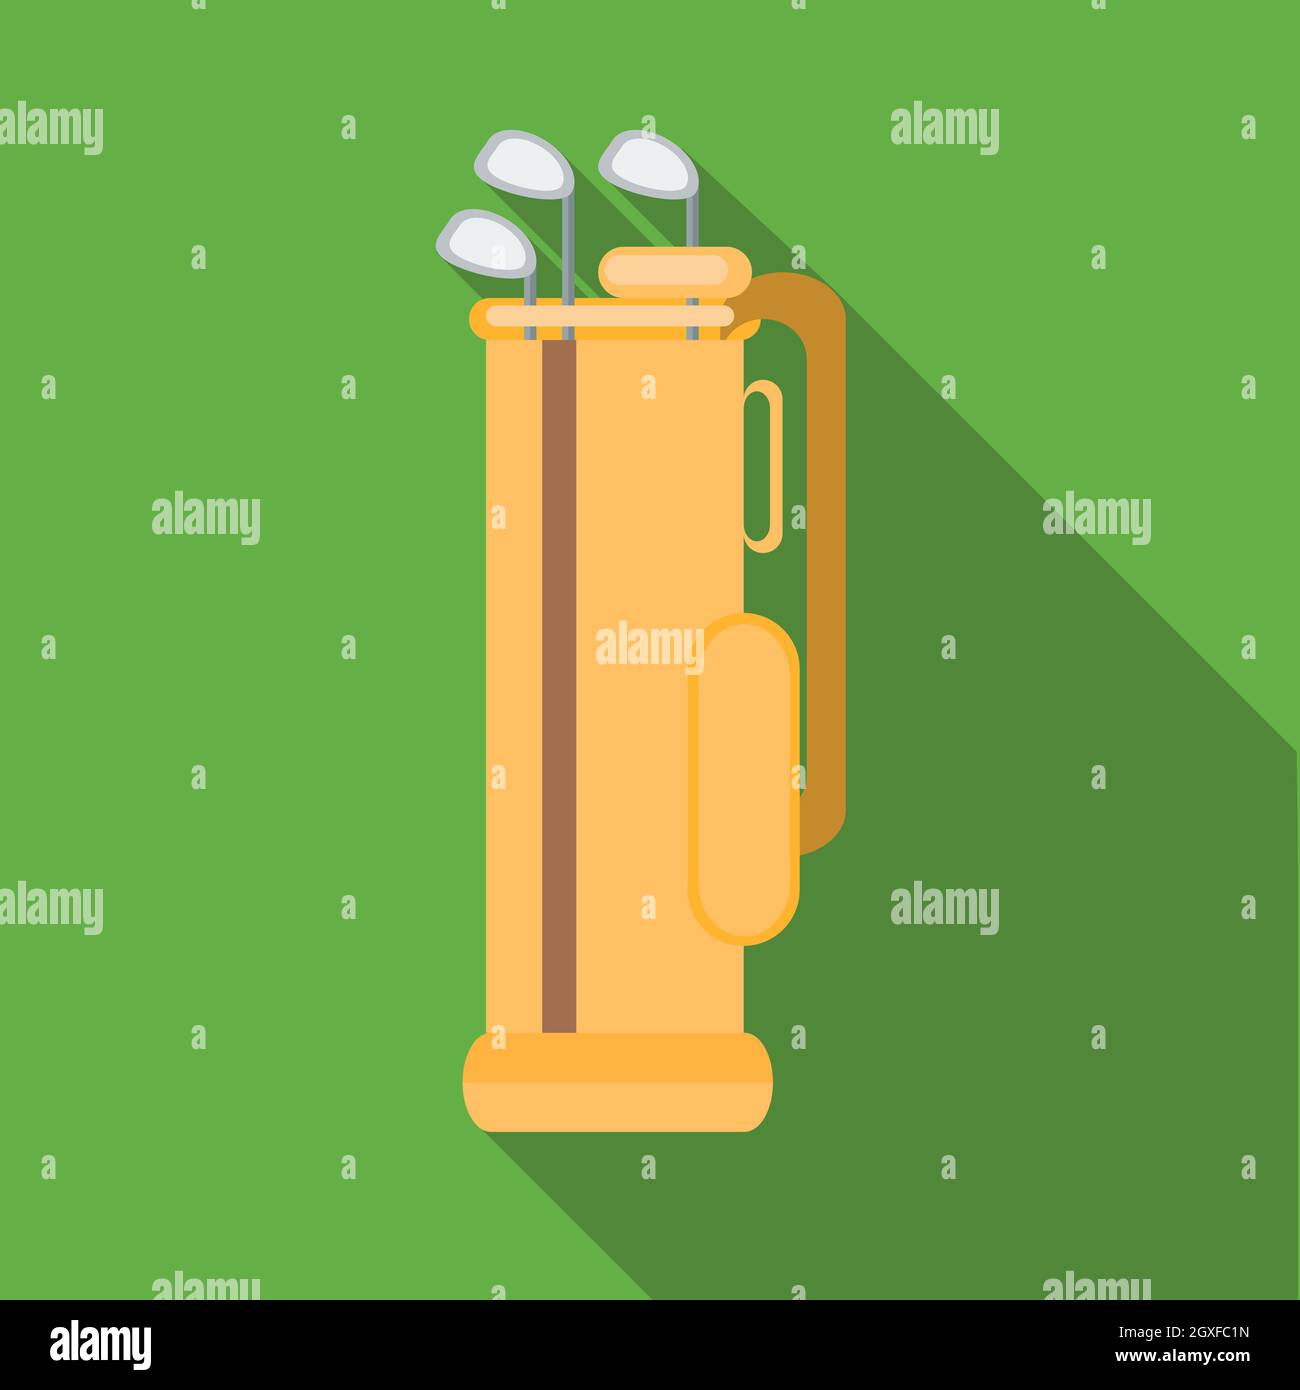 Golf clubs in an orange bag icon in flat style on a green background Stock Photo